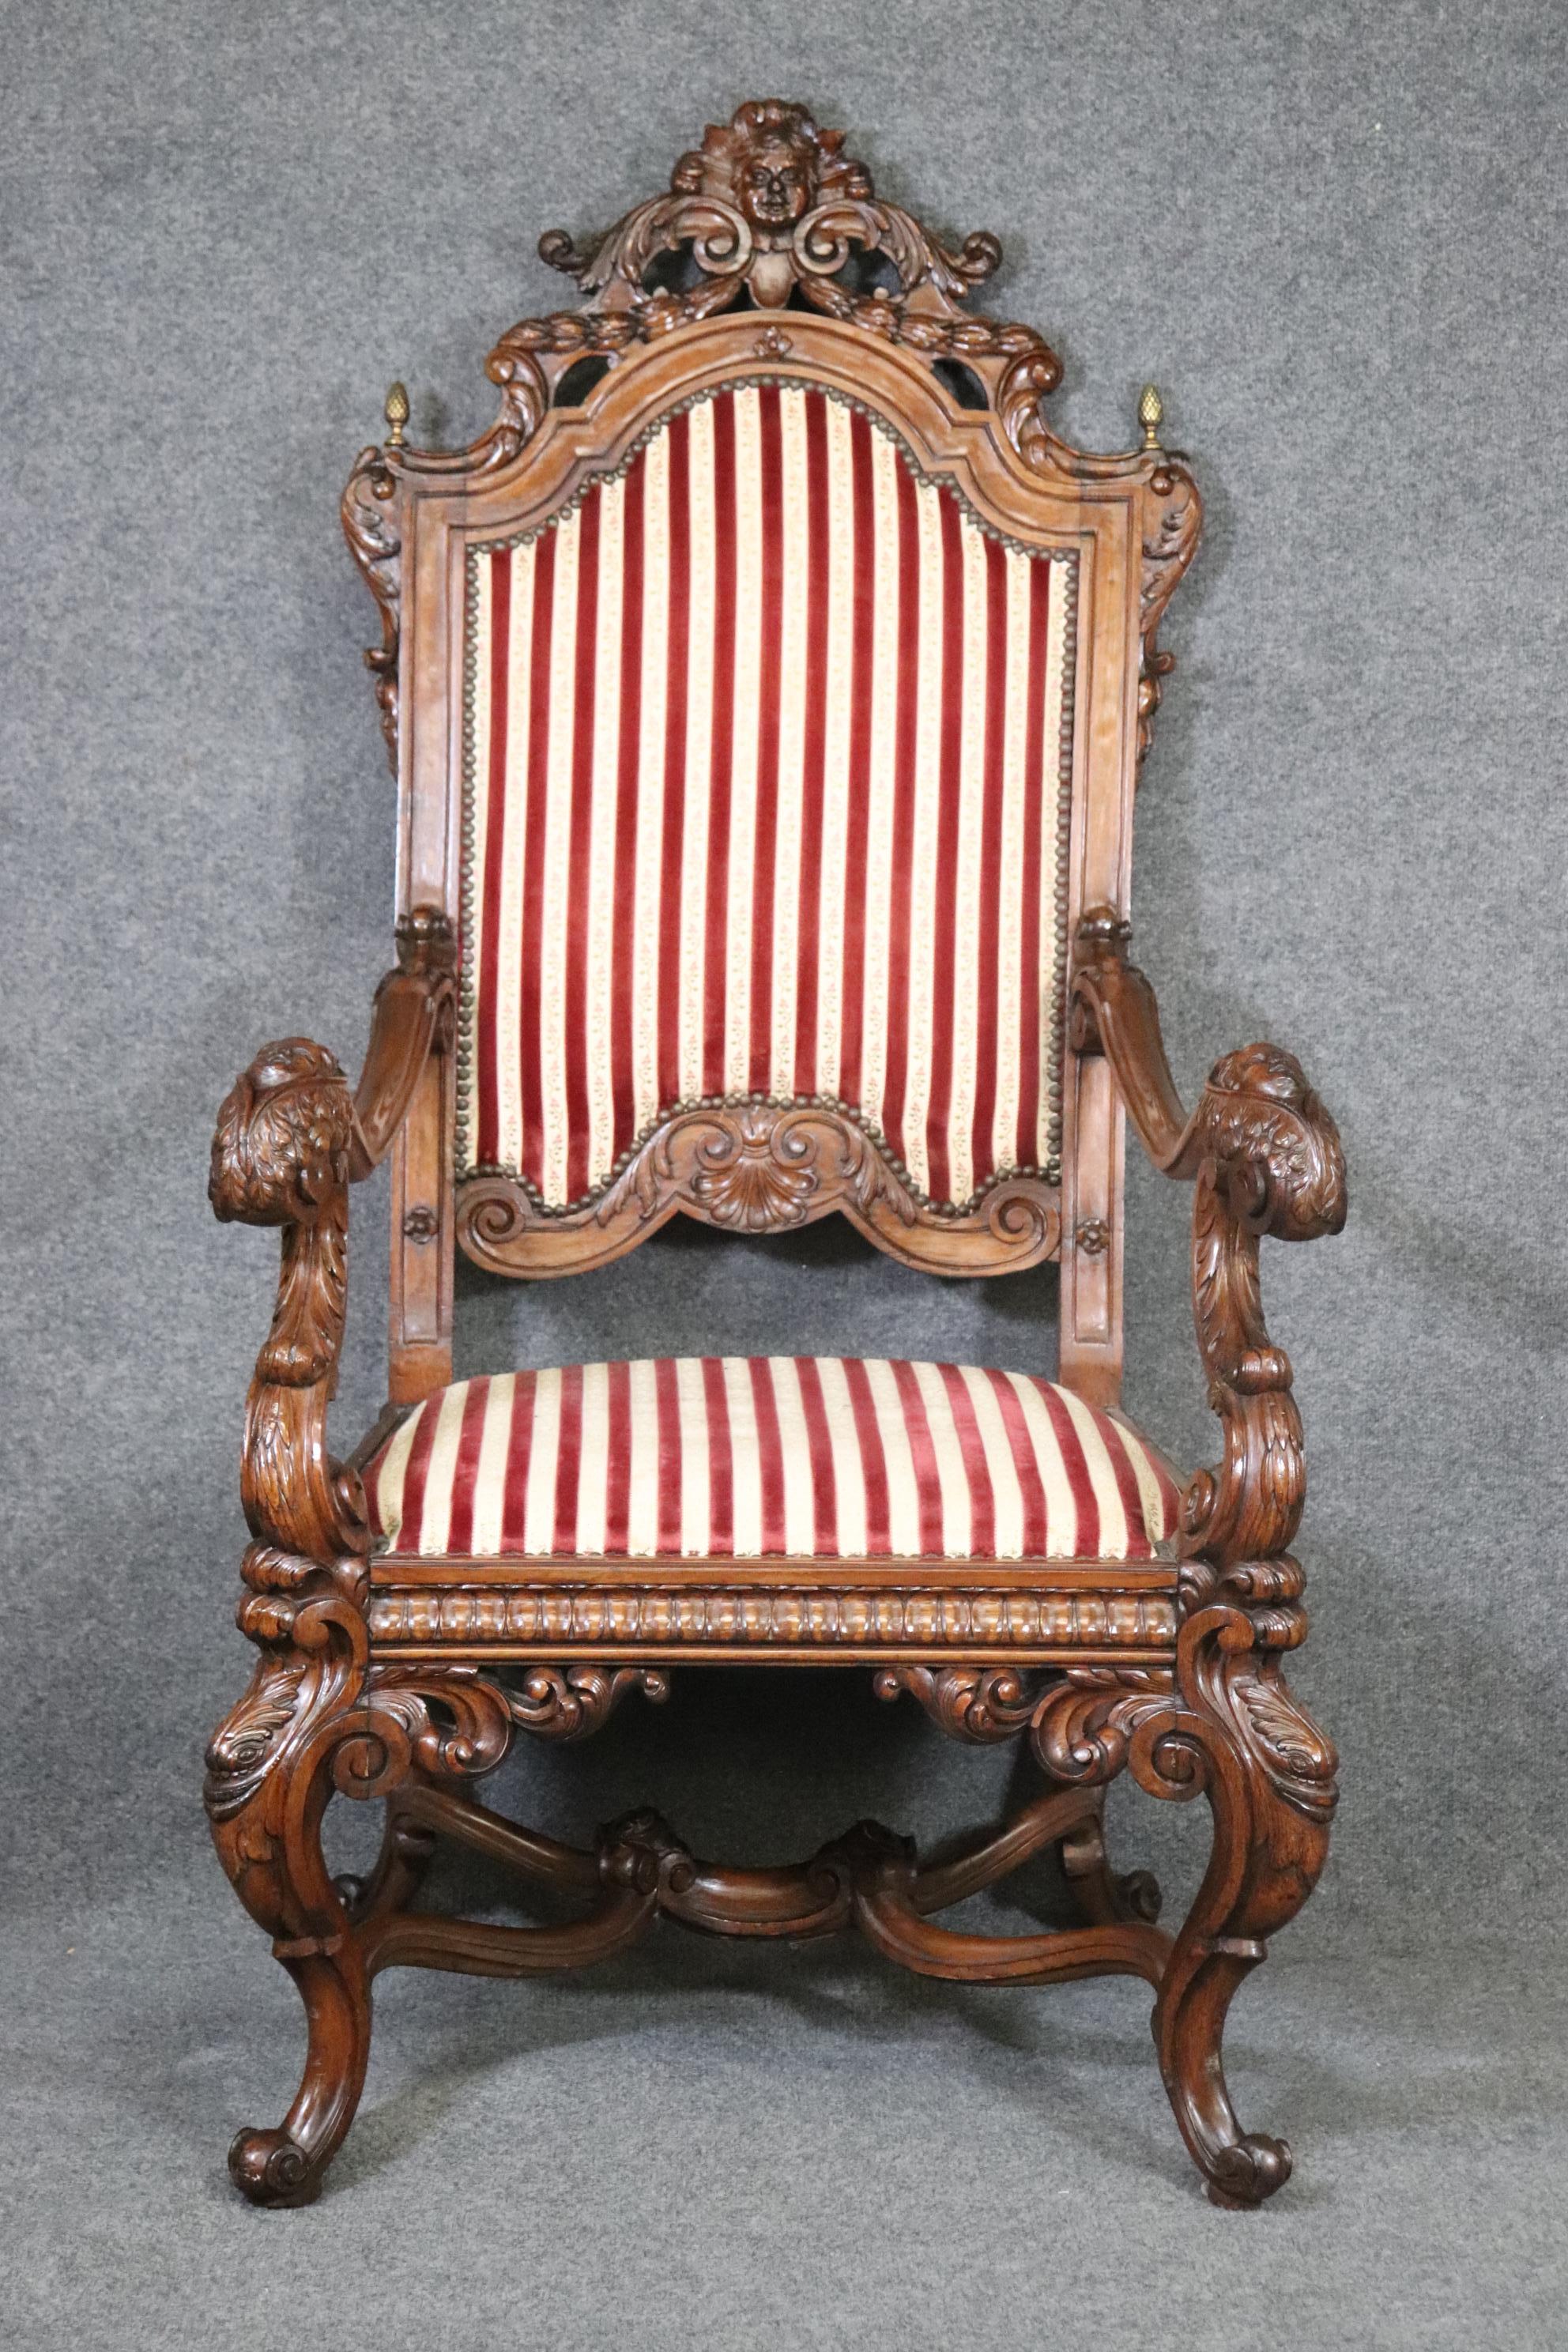 Dimensions- H: 58.25in W: 30.5in D: 31in SH: 19in
This antique carved throne chair is made of the highest quality and is extremely nice! If you take a close look you can see the detail in the faces on the top of the arms as well as the carved face